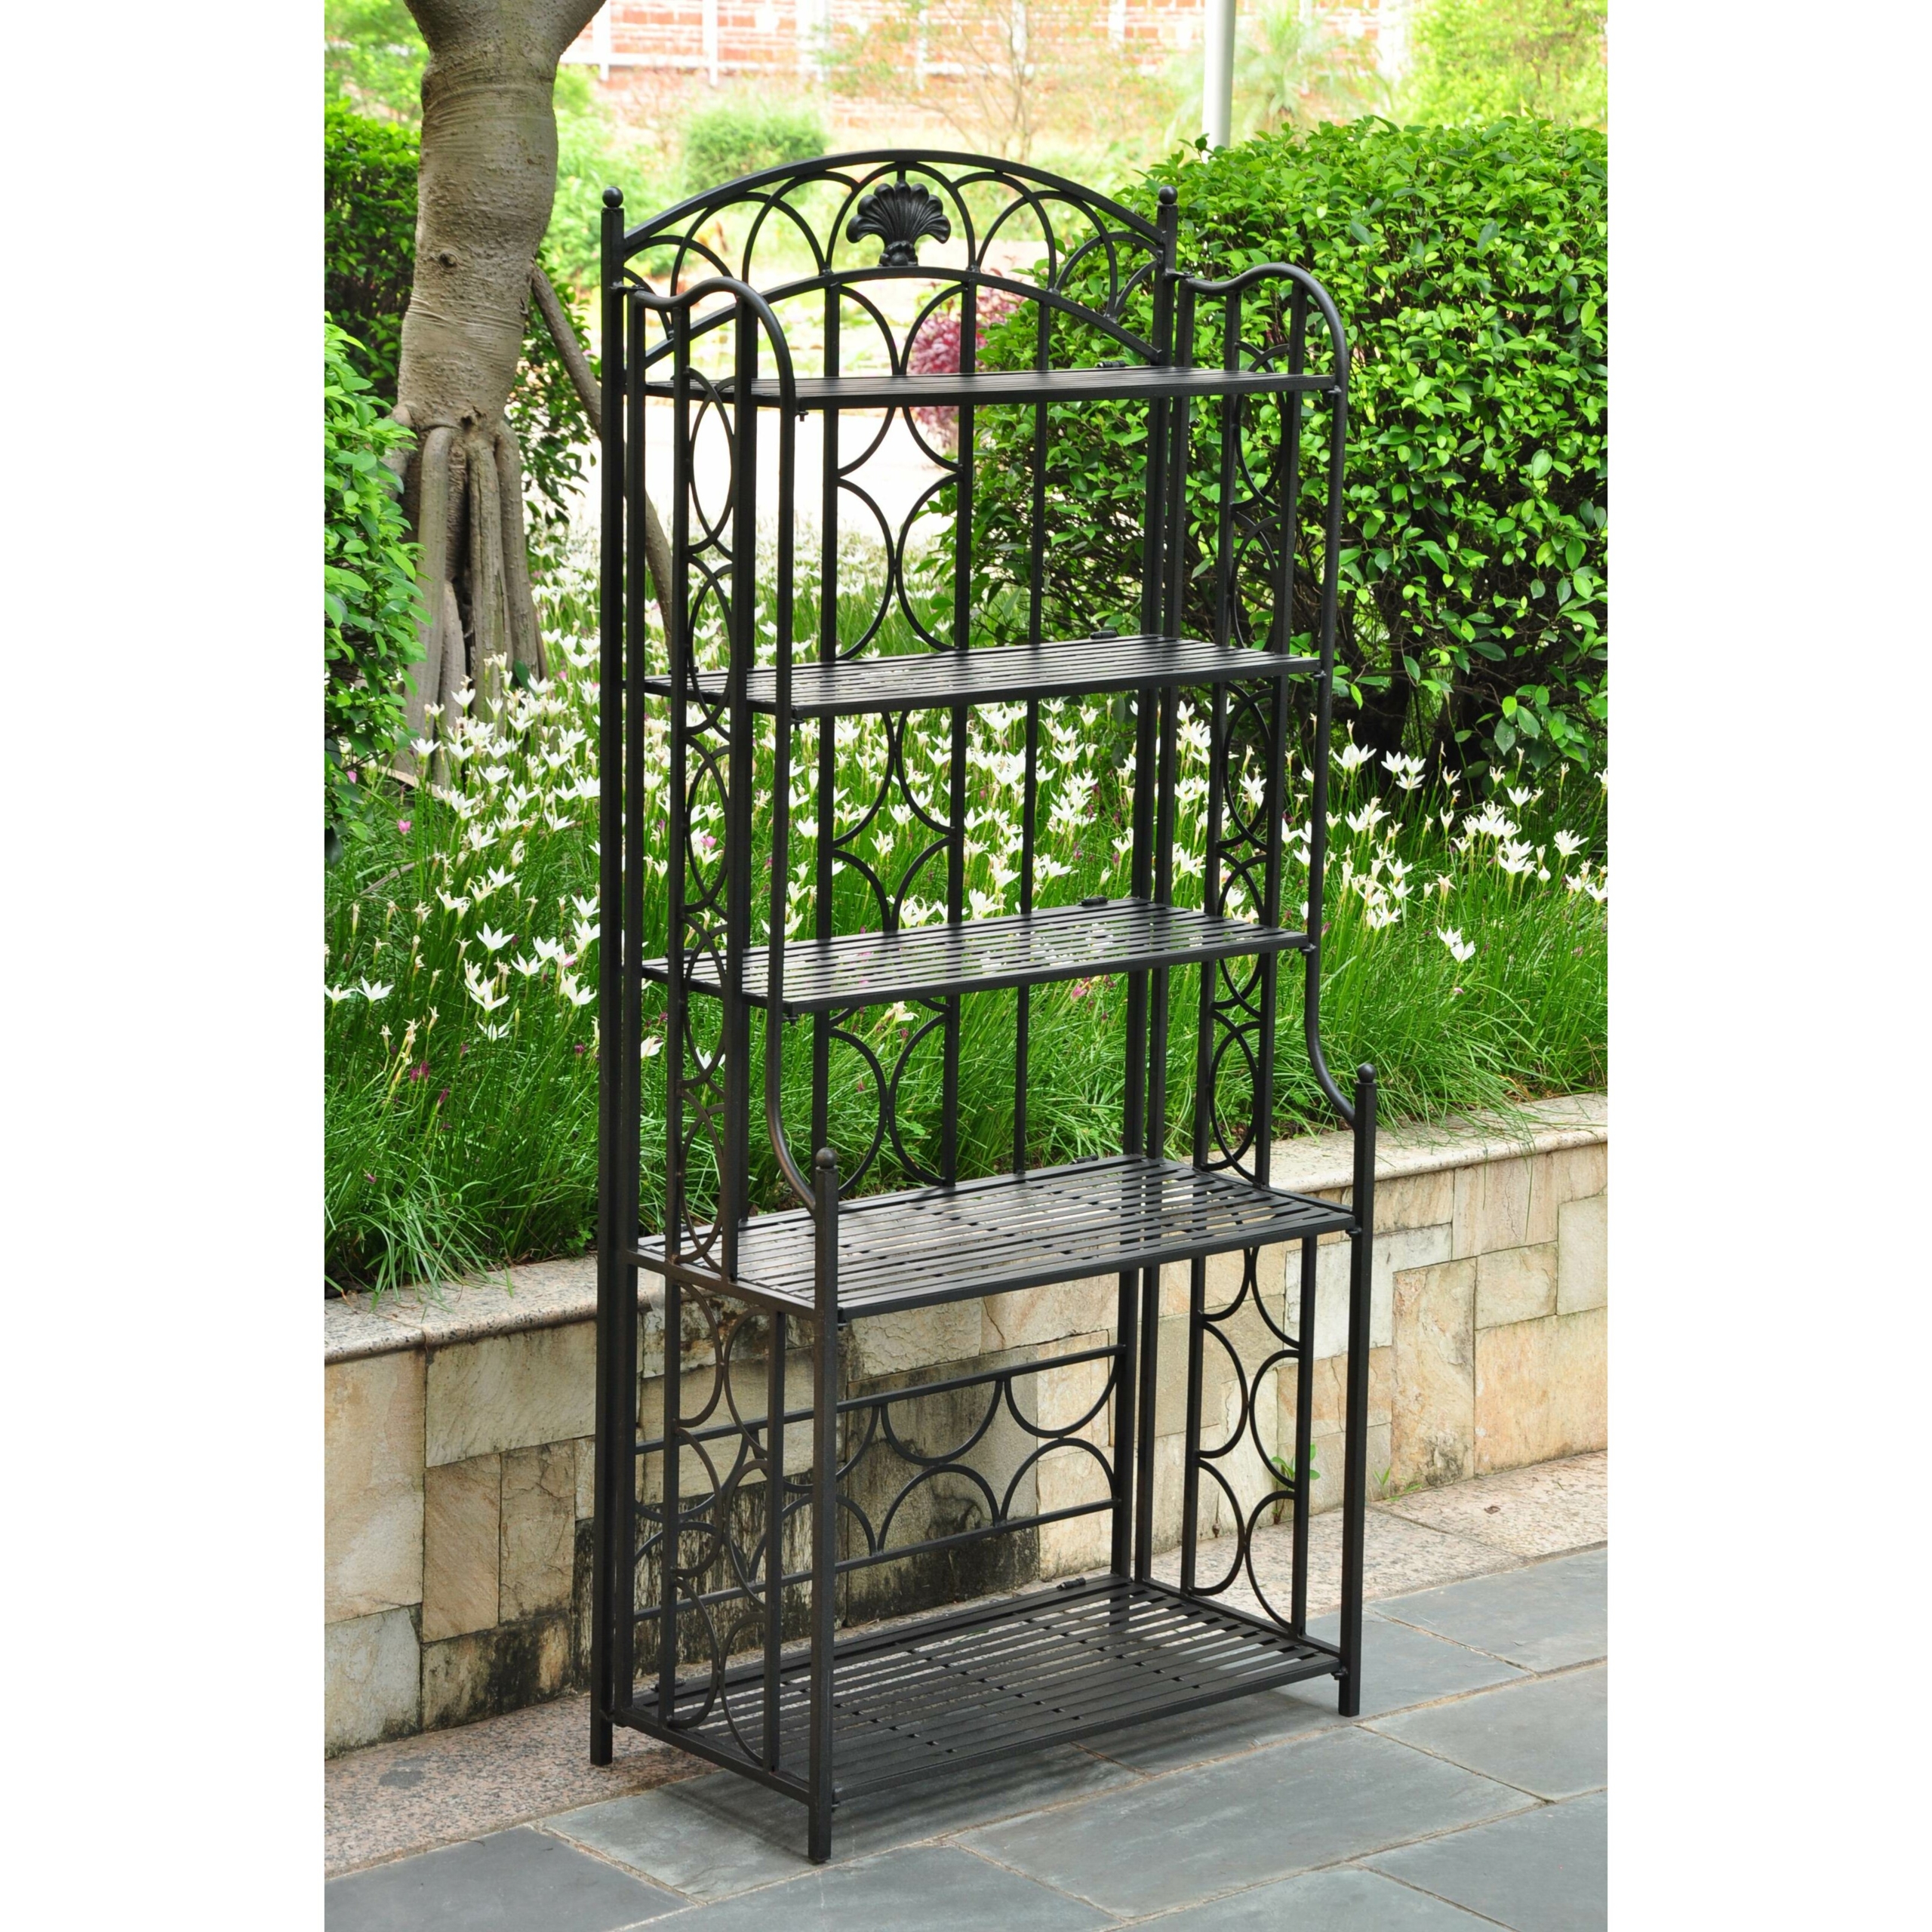 Mandalay 4 tier wrought iron bakers rack antique black available